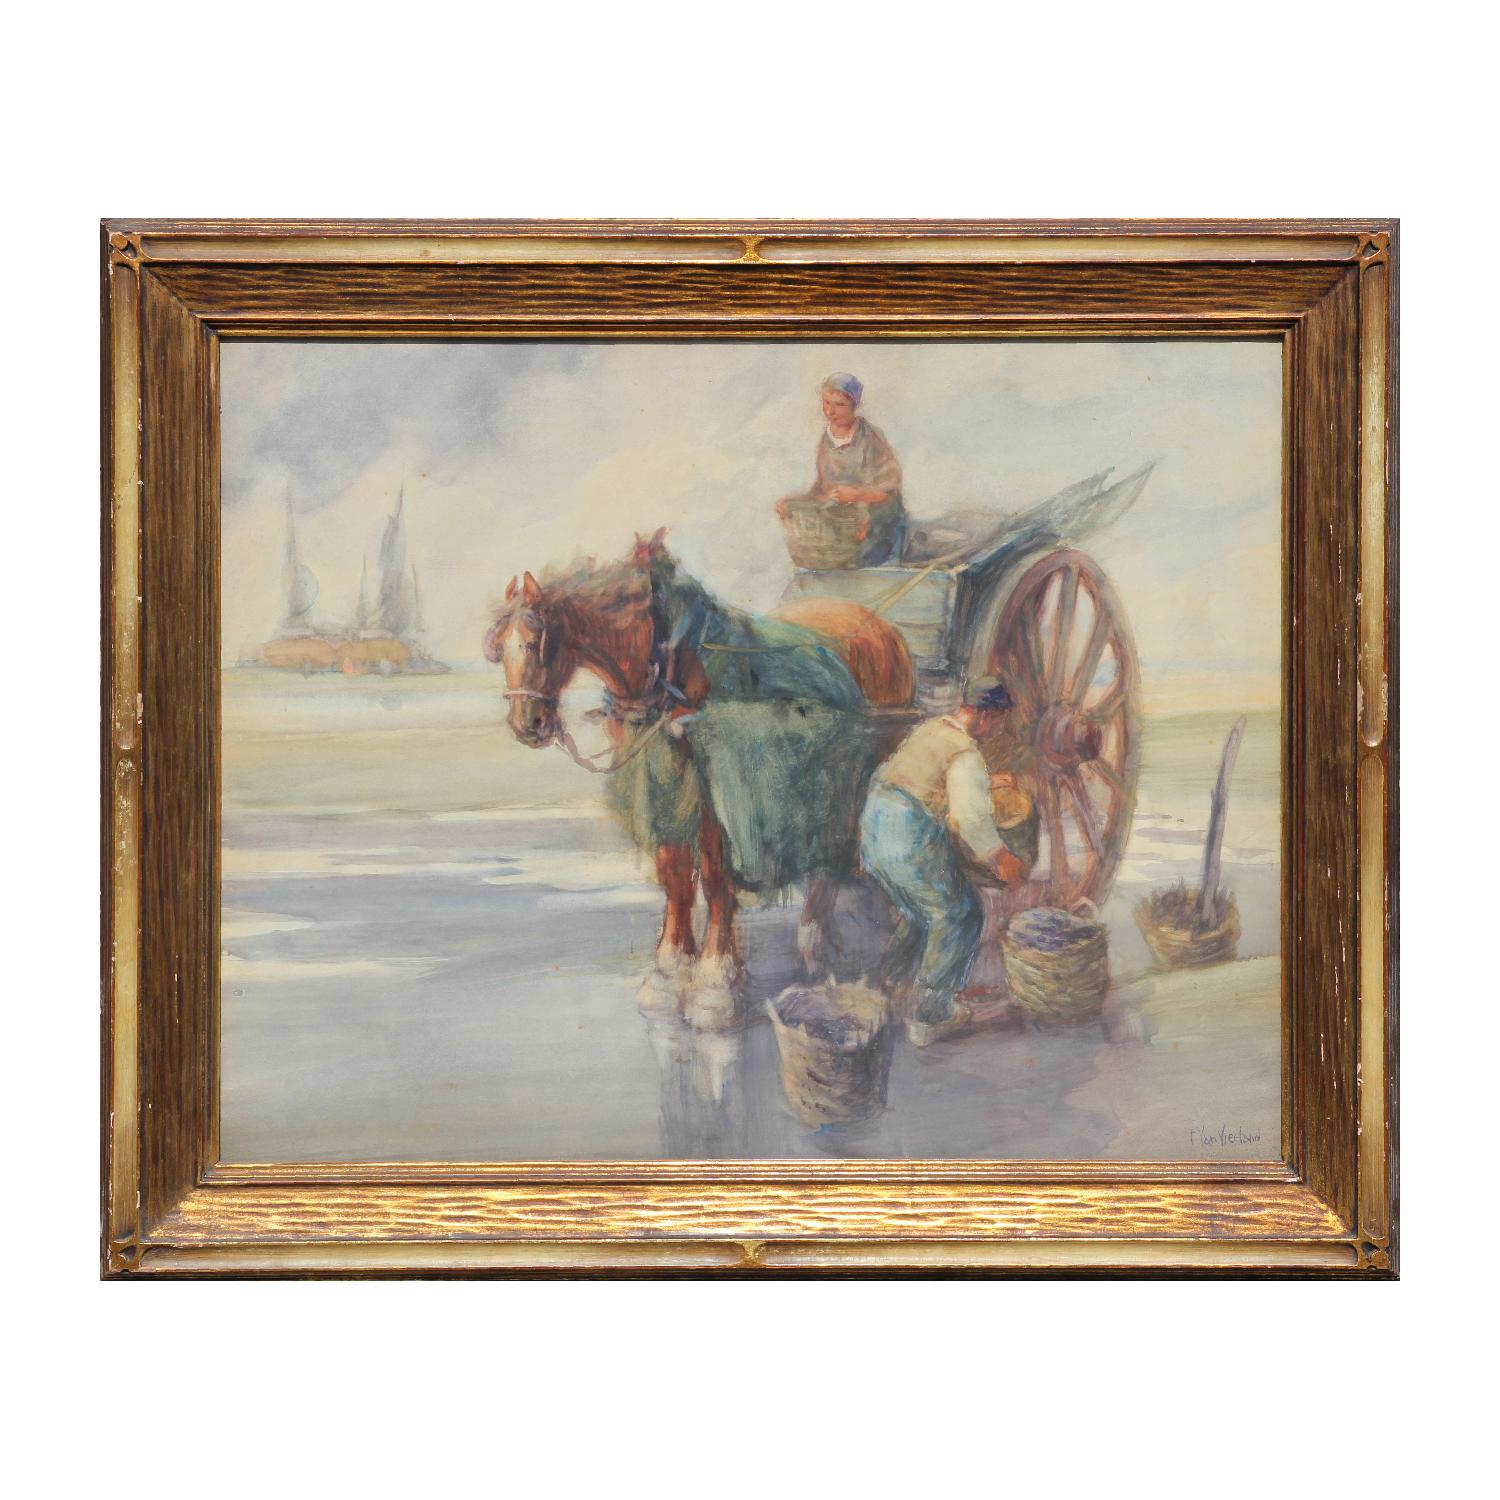 Francis William Van Vreeland Animal Painting - Early Impressionist Painting with a Horse Drawn Wagon 